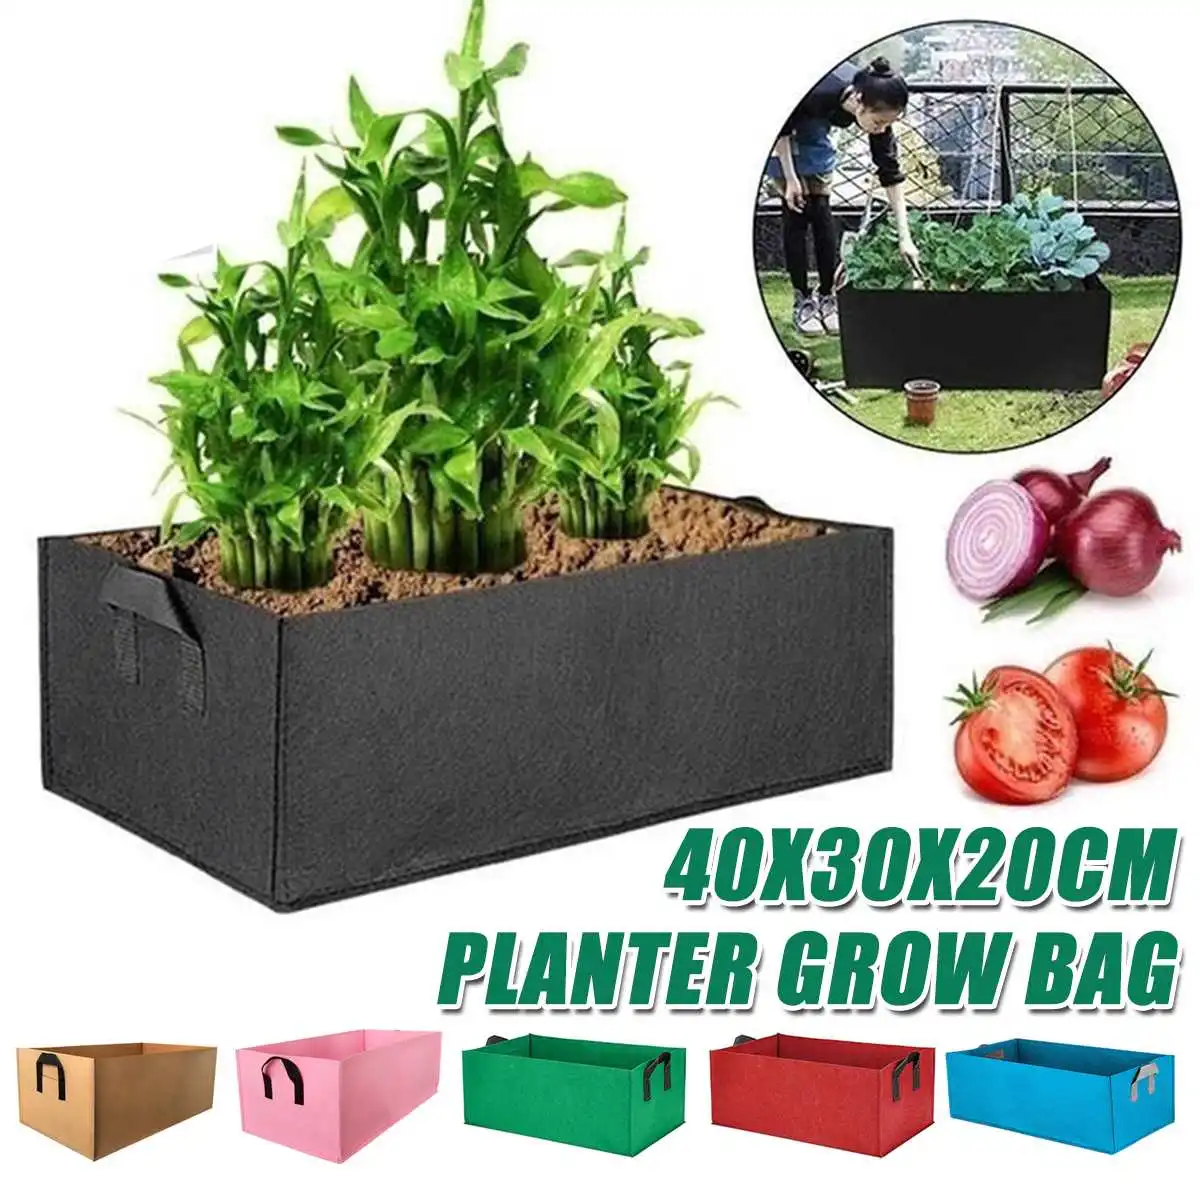 

Planting Container Grow Bags 4 Sizes New Fabric Raised Garden Bed Breathable Felt Fabric Planter Pot Environmentally Bags